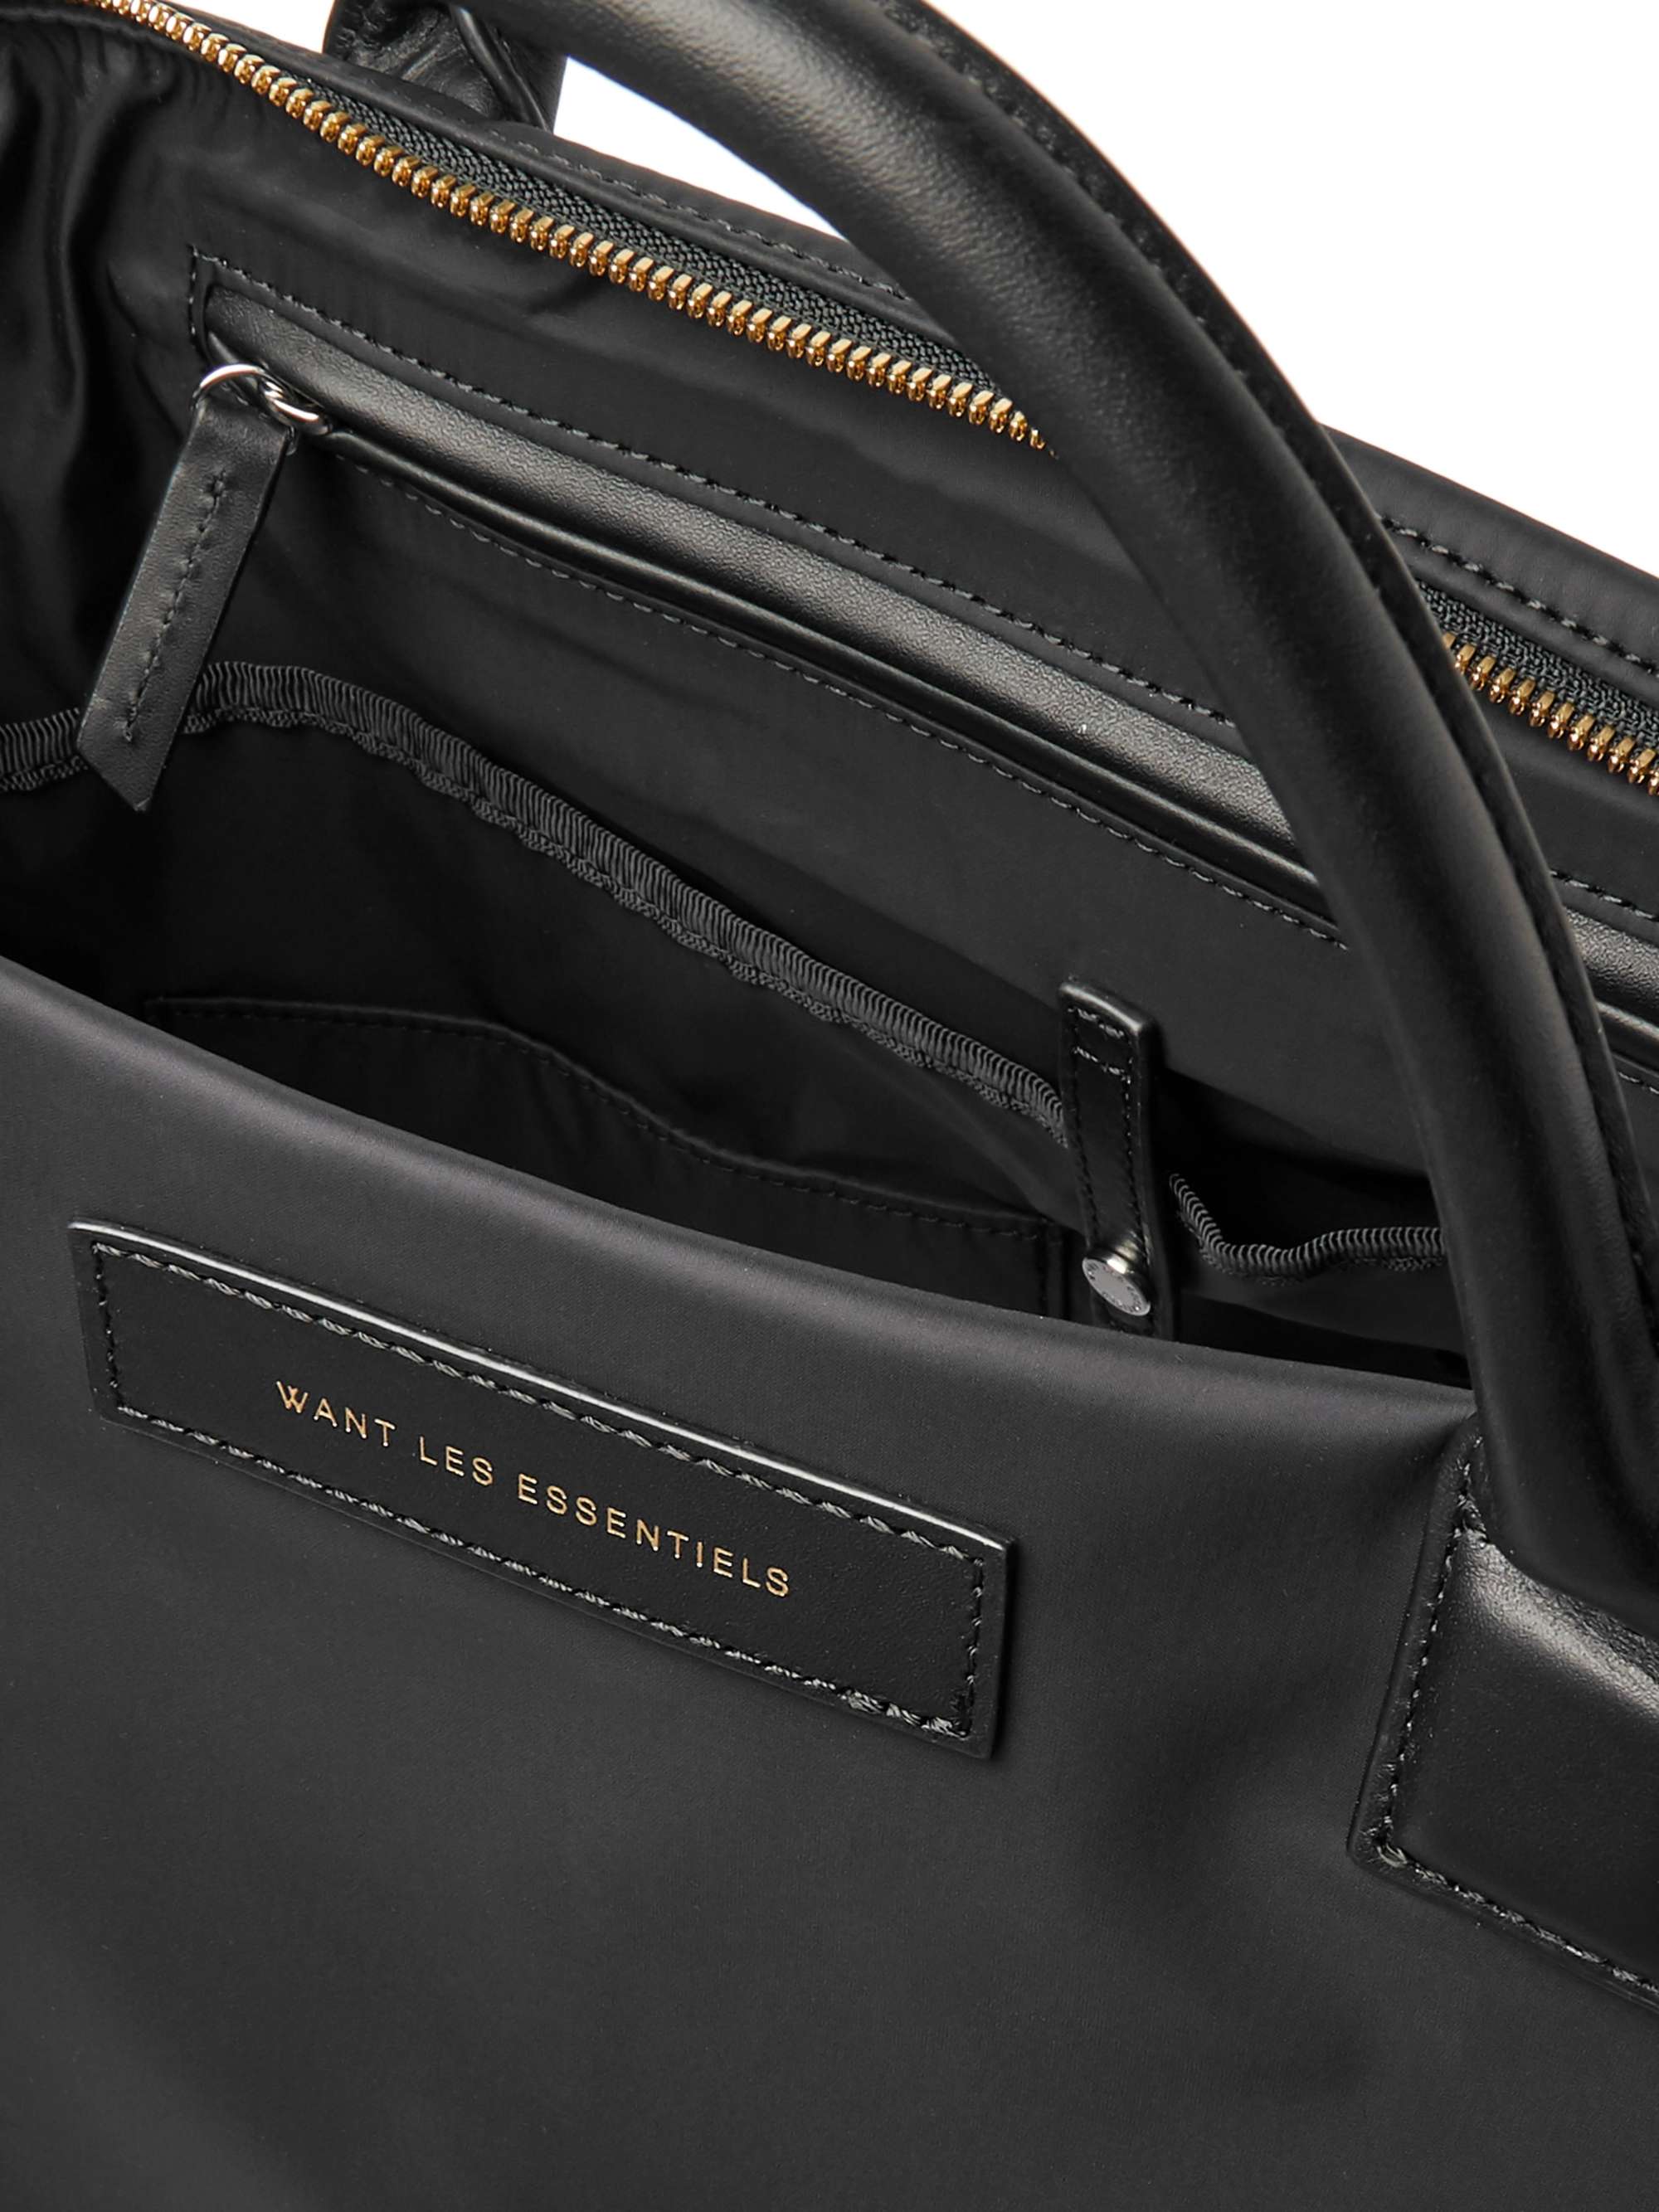 WANT LES ESSENTIELS O'Hare Leather-Trimmed Nylon Tote Bag for Men | MR ...